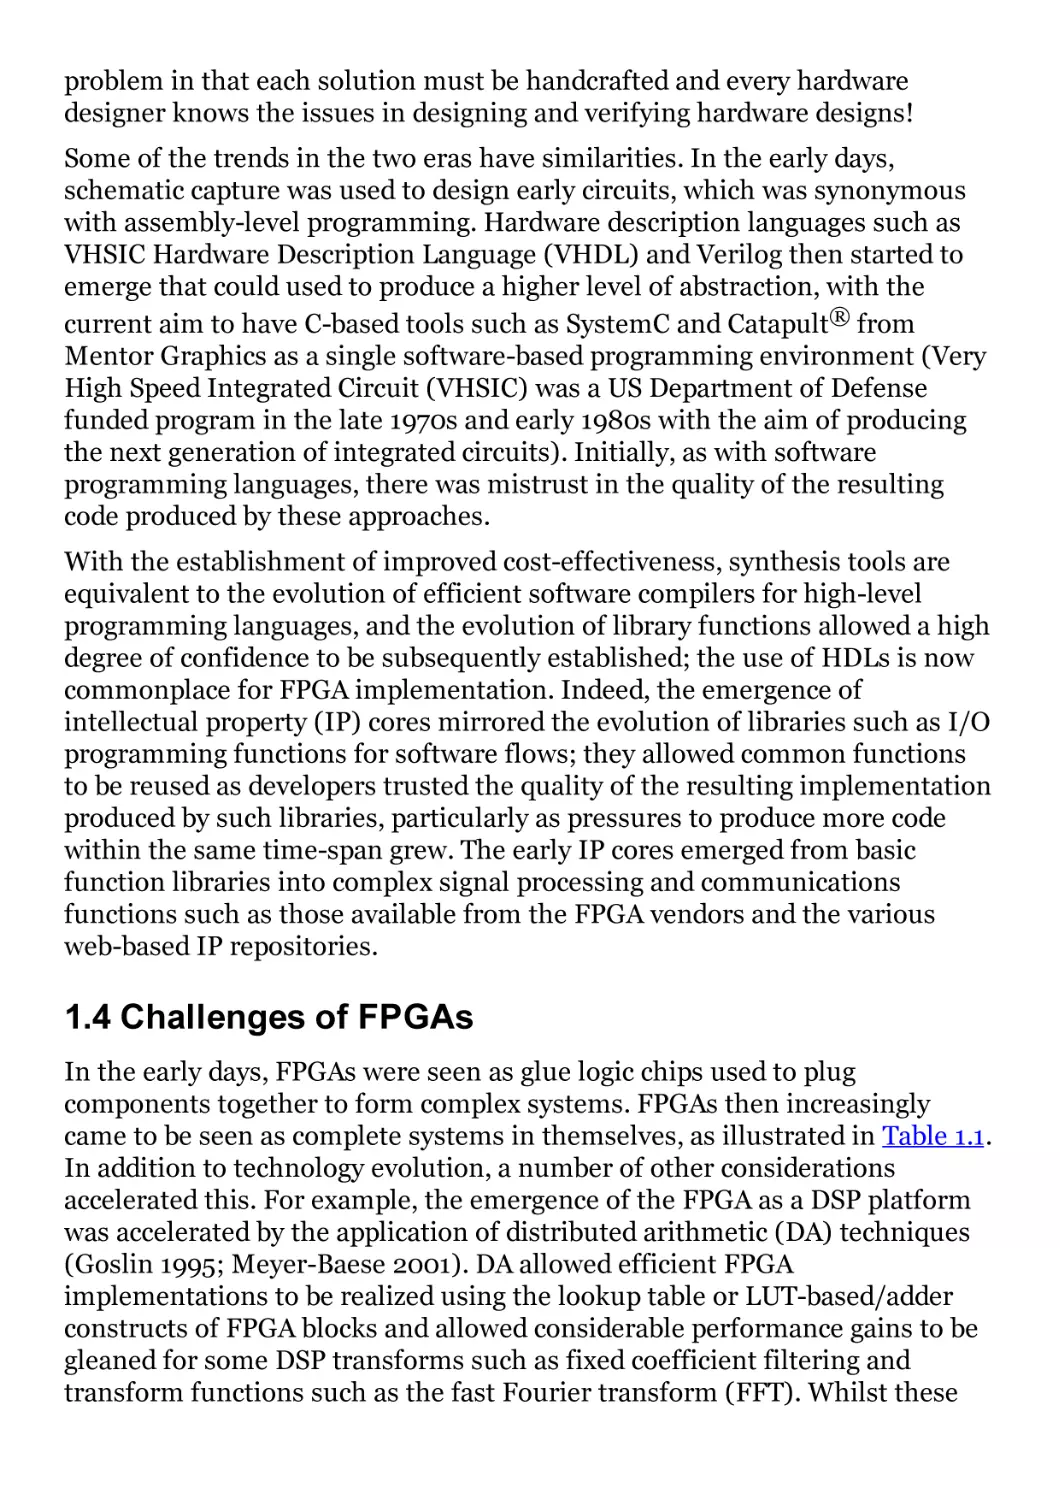 1.4 Challenges of FPGAs